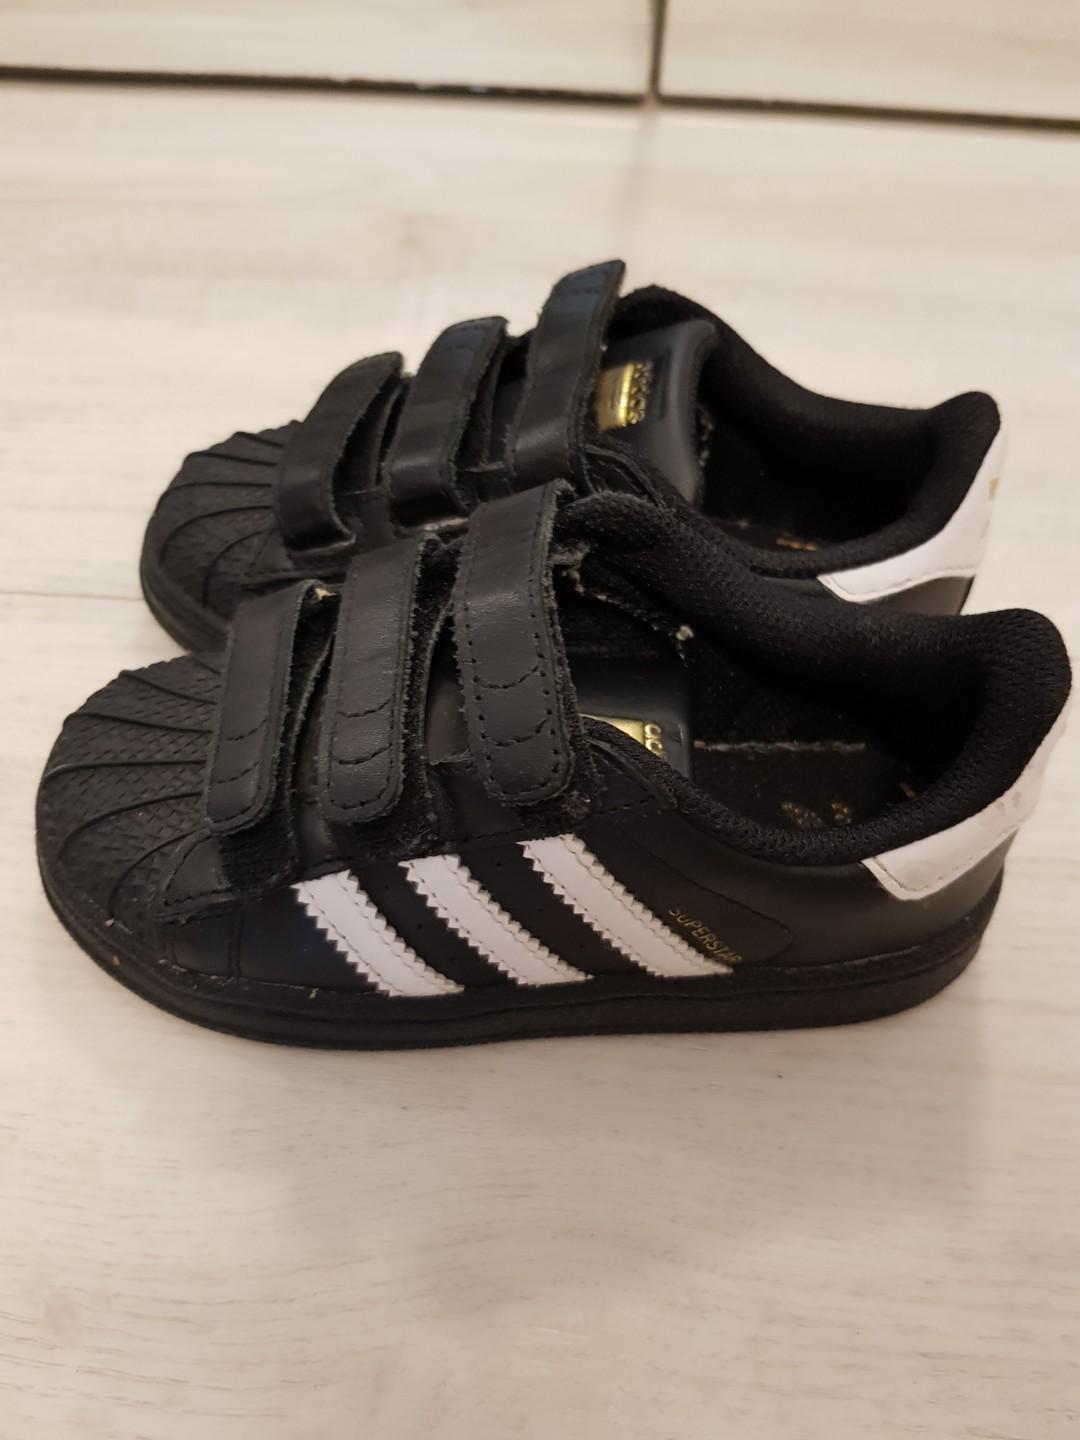 Adidas Superstar for Toddlers Size US 8 